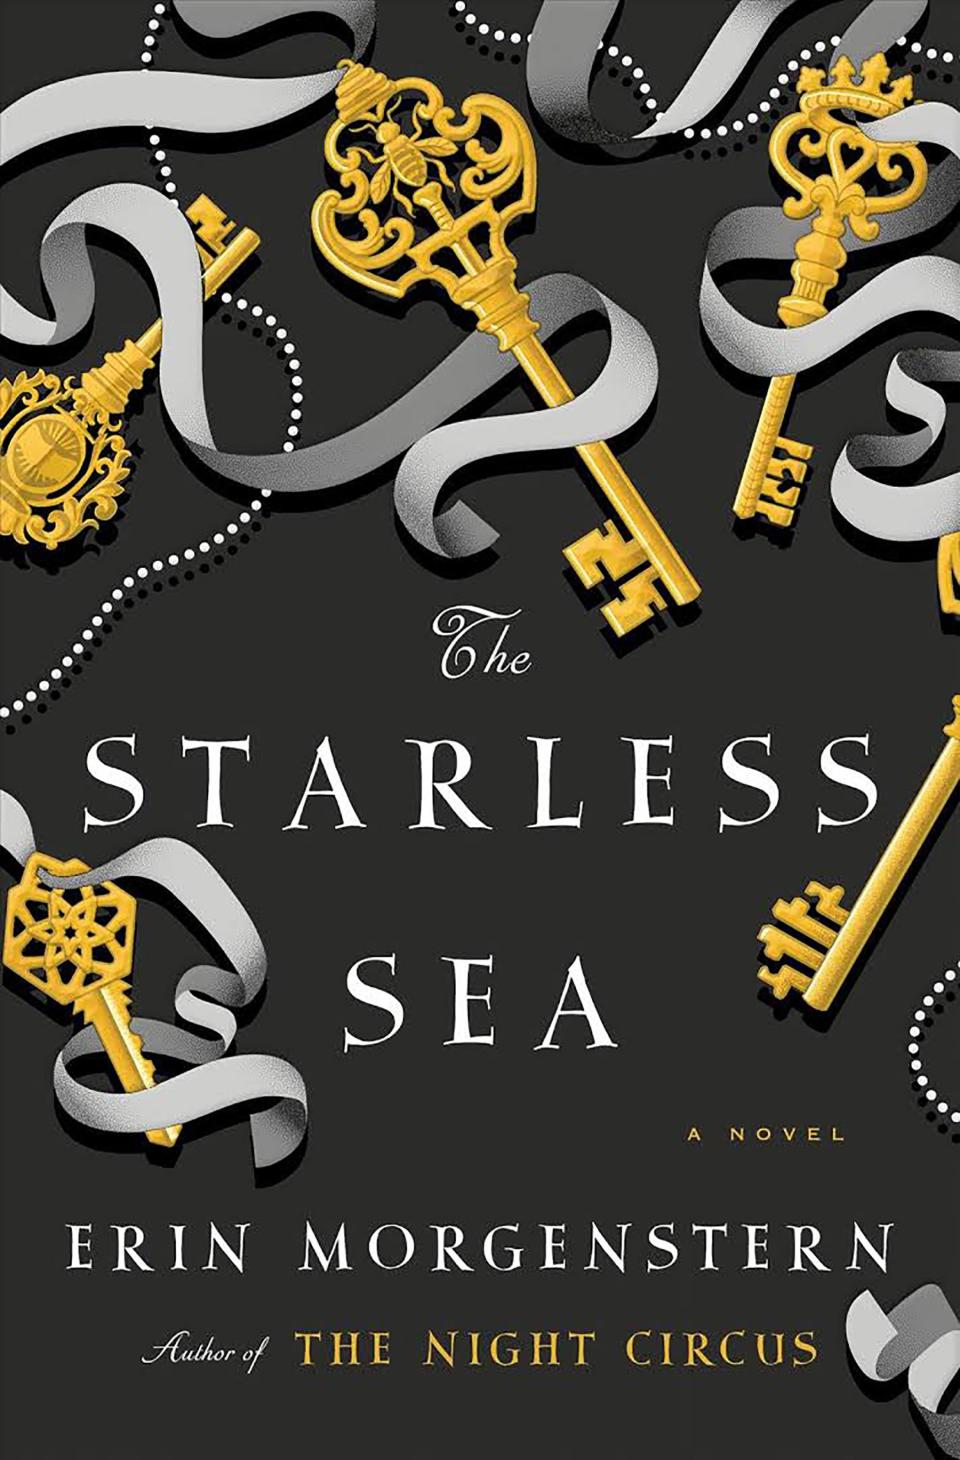 The Starless Sea , by Erin Morgenstern